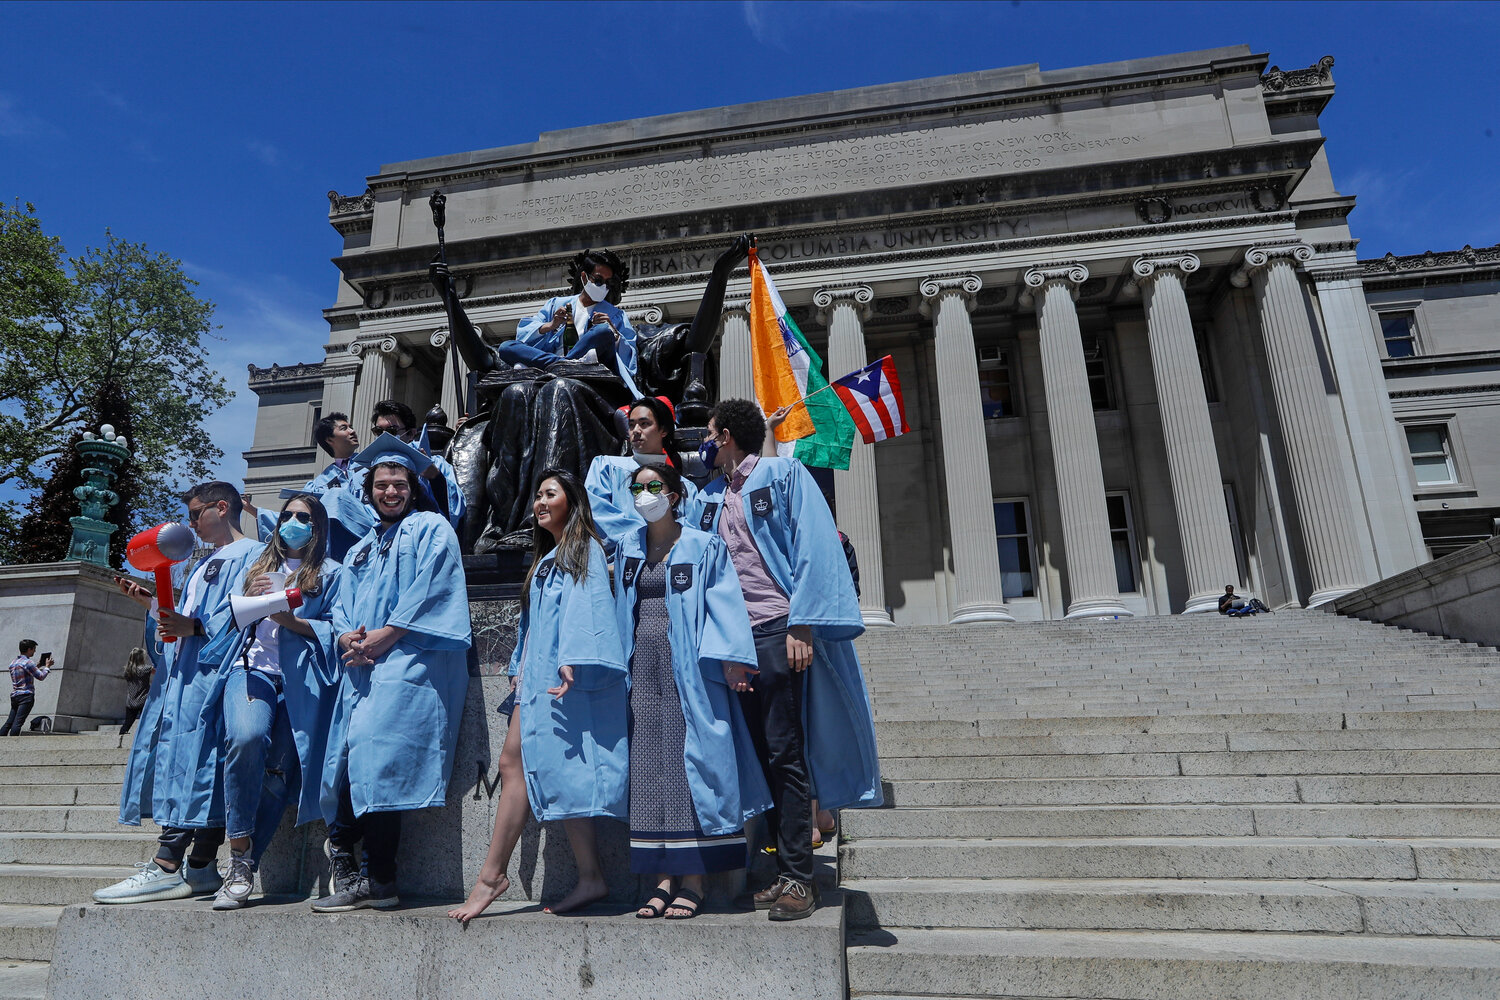 Columbia University graduates posed for celebratory photographs on commencement day in May 2020 in front of the Alma Mater statue near the Low Memorial Library.